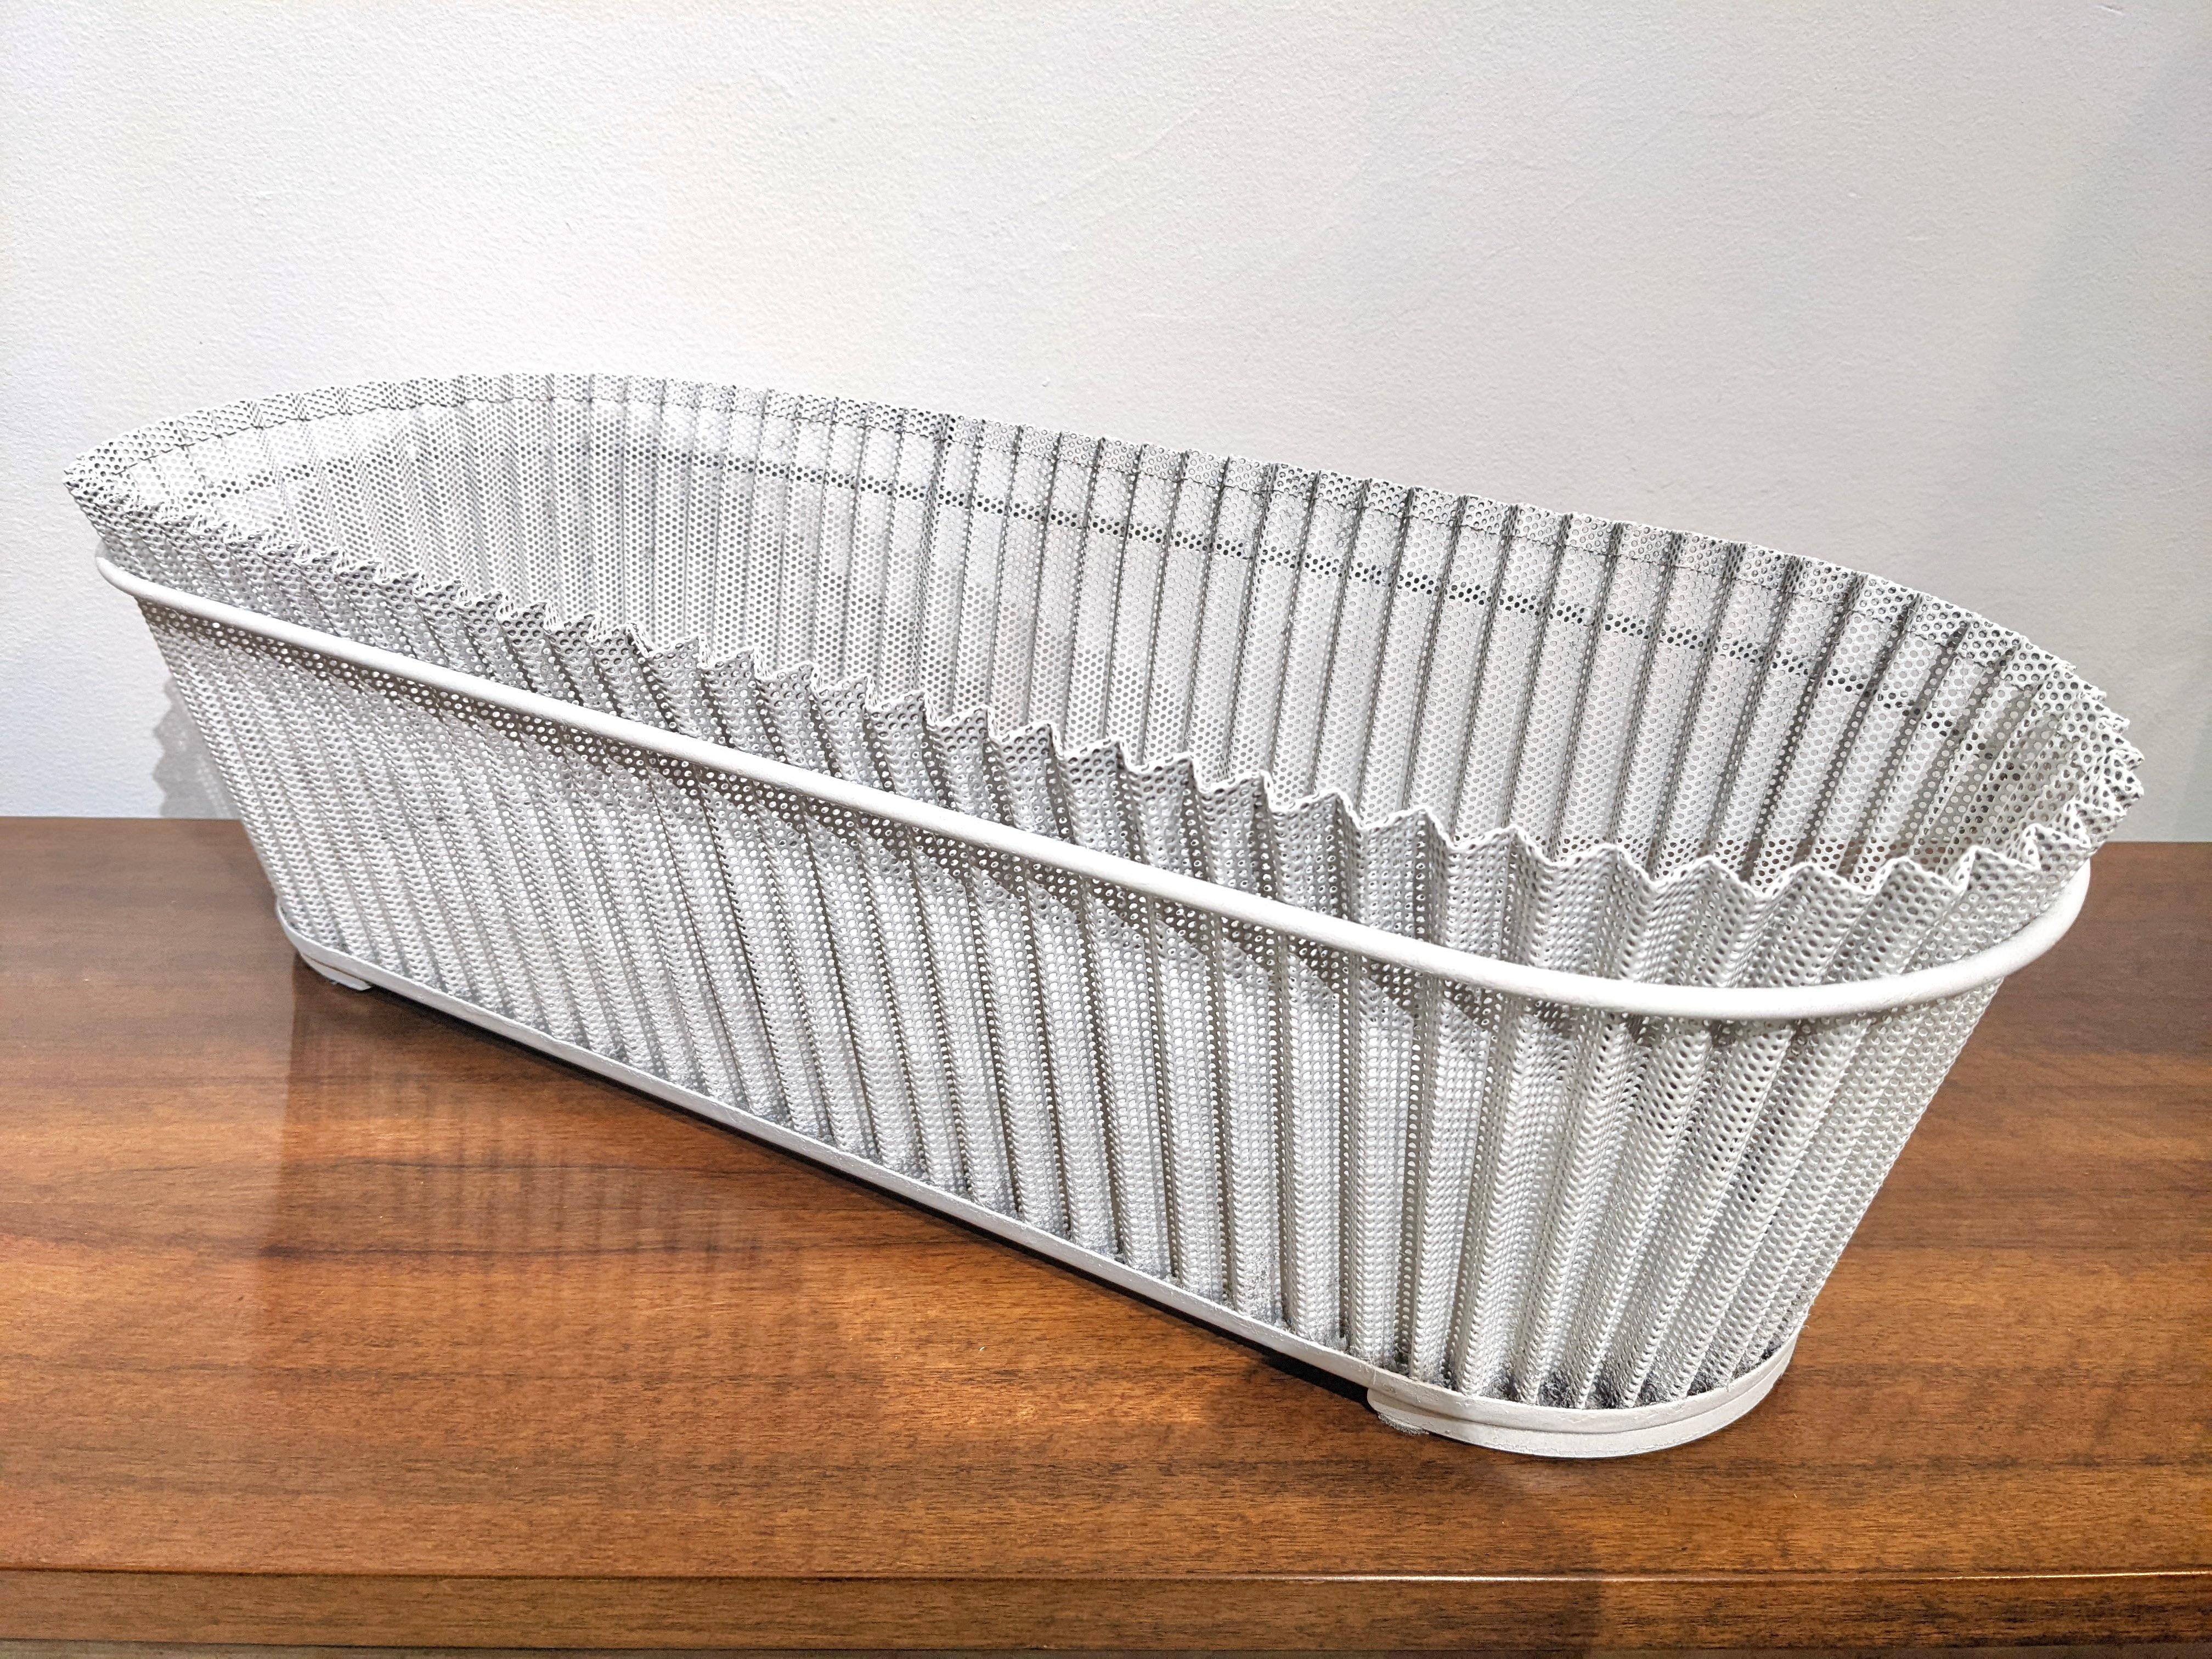 Planter in White Perforated Sheet Metal by Mathieu Matégot For Sale 2